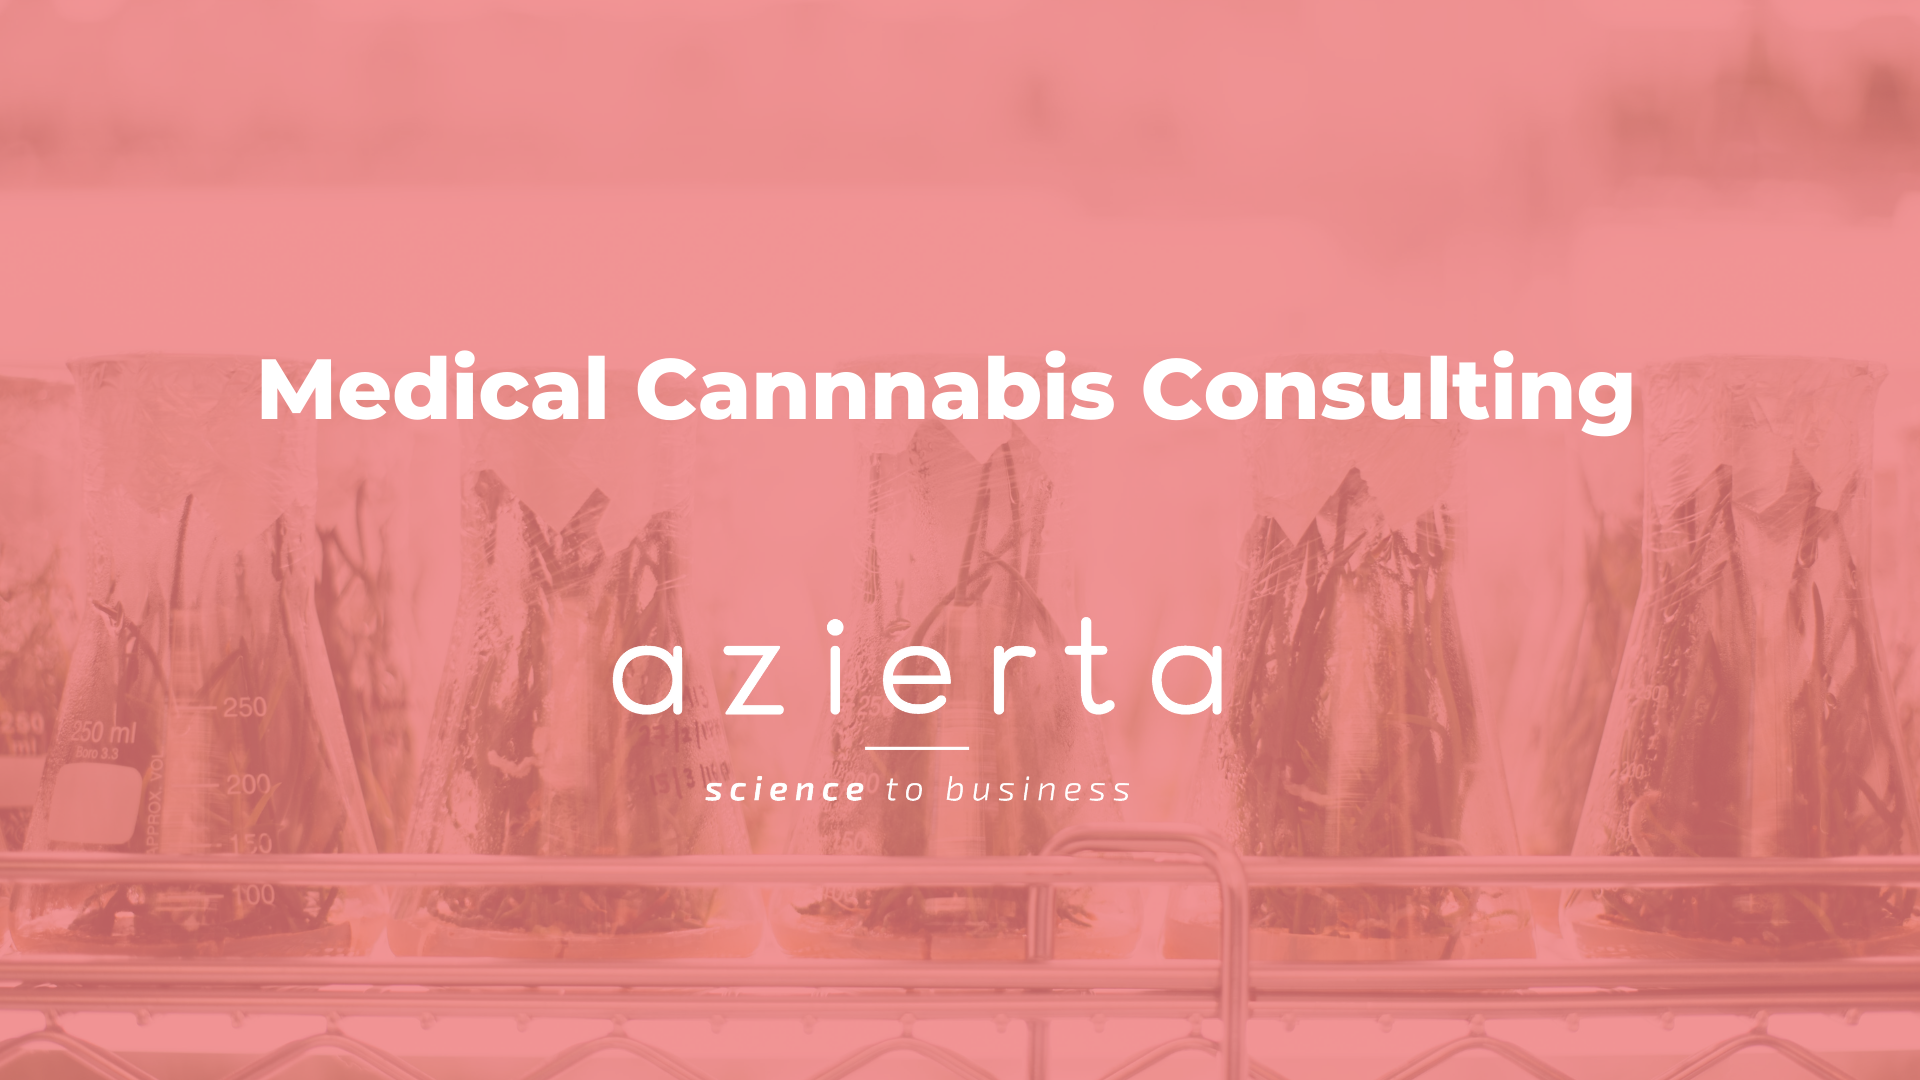 Medical Cannabis Consulting